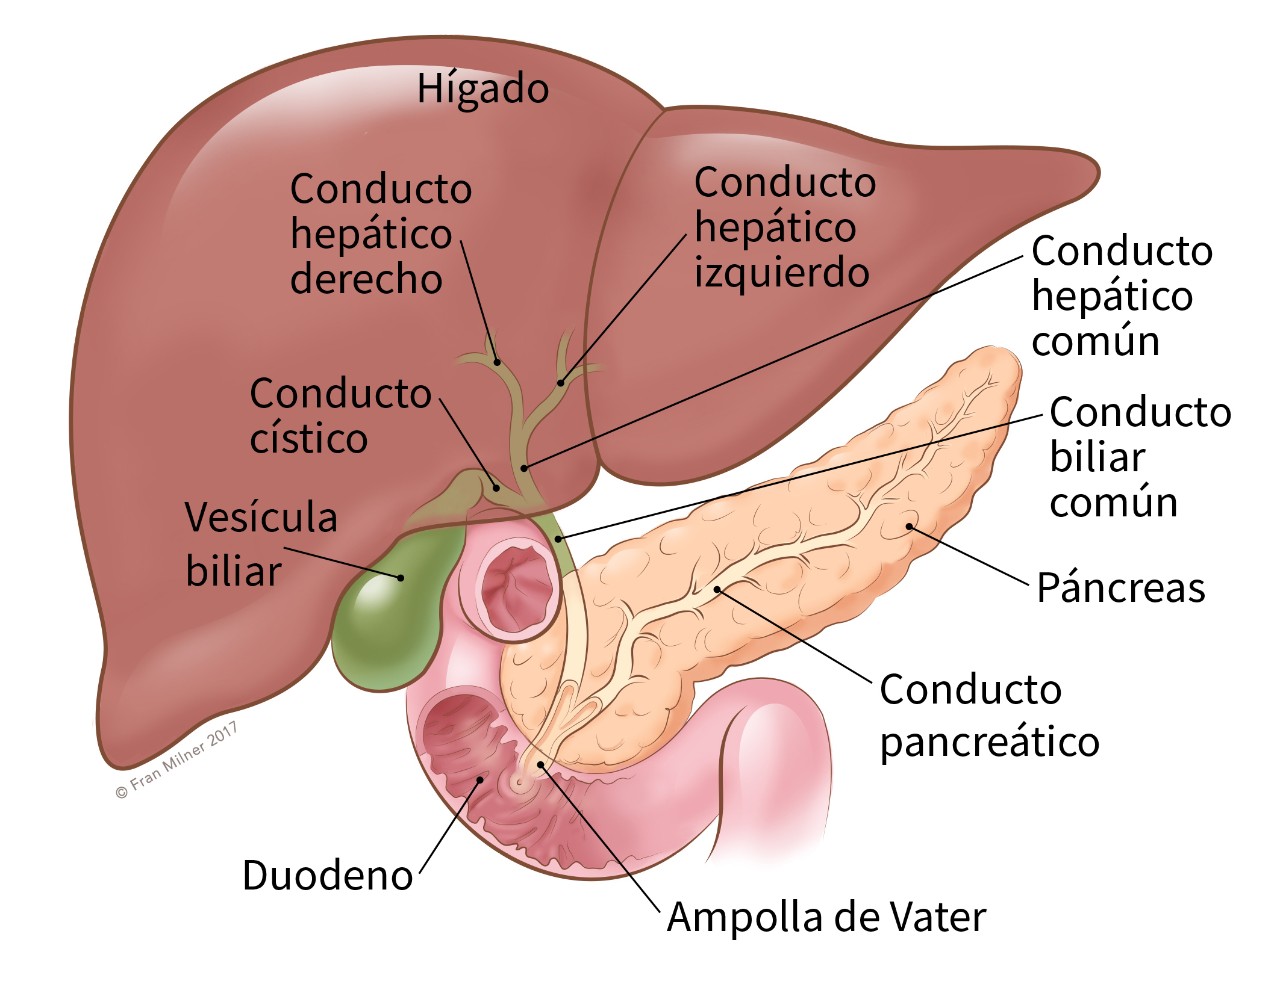 illustration showing the location of the common bile duct, liver, pancreas, pancreatic duct, ampula of vater, duodenum, gallbladder, cystic duct, right hepatic duct, left hepatic duct and common hepatic duct